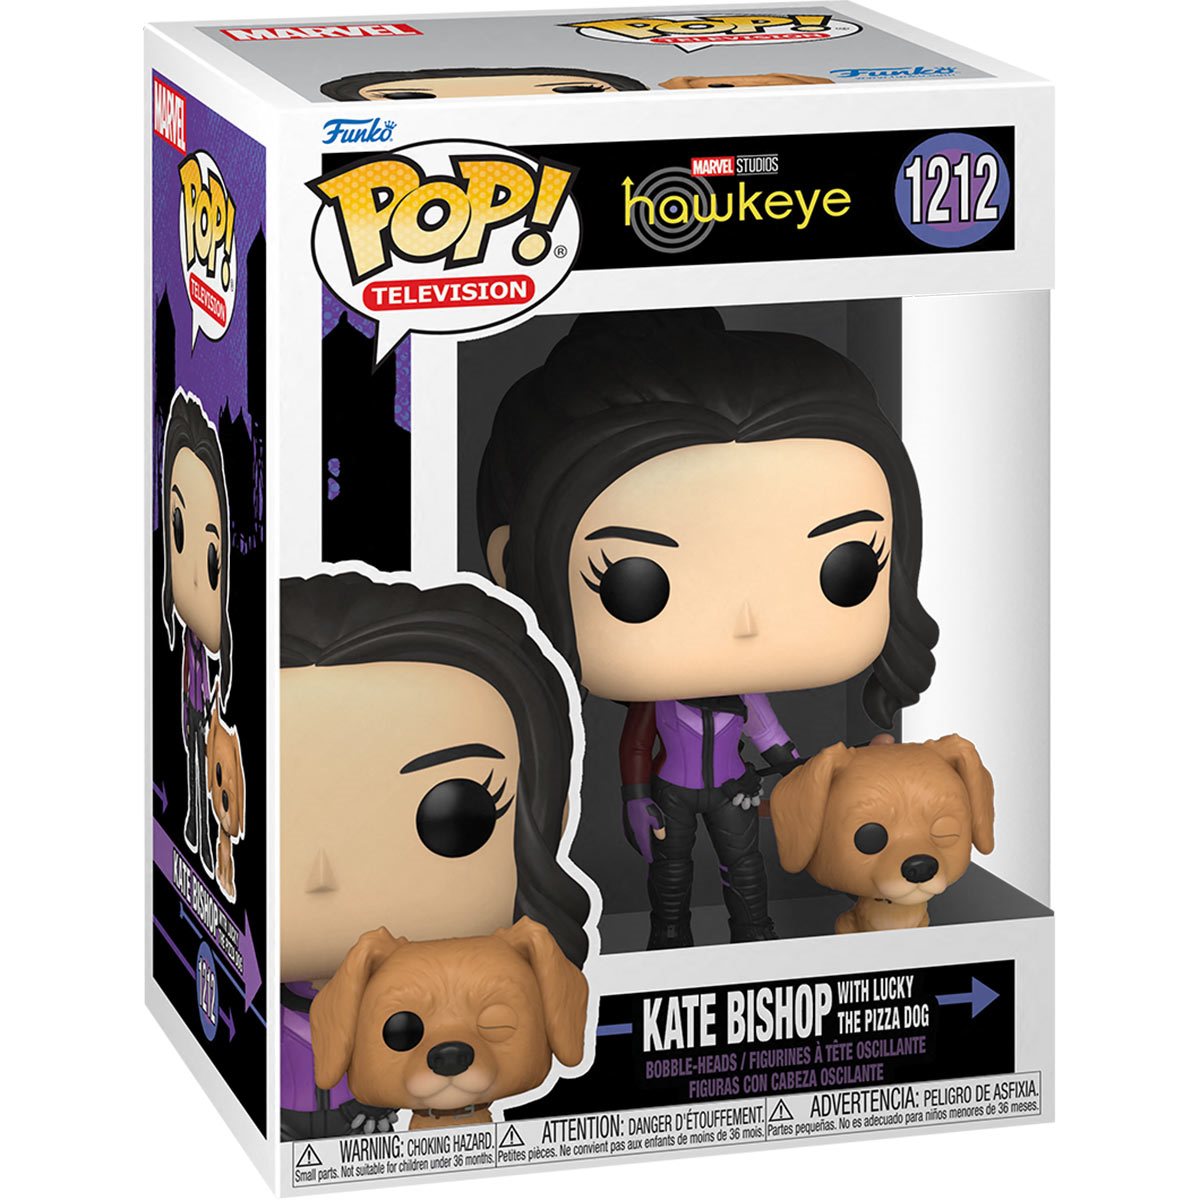 Kate Bishop with Lucky the Pizza Dog Funko Pop! Vinyl Figure #1212 - 0